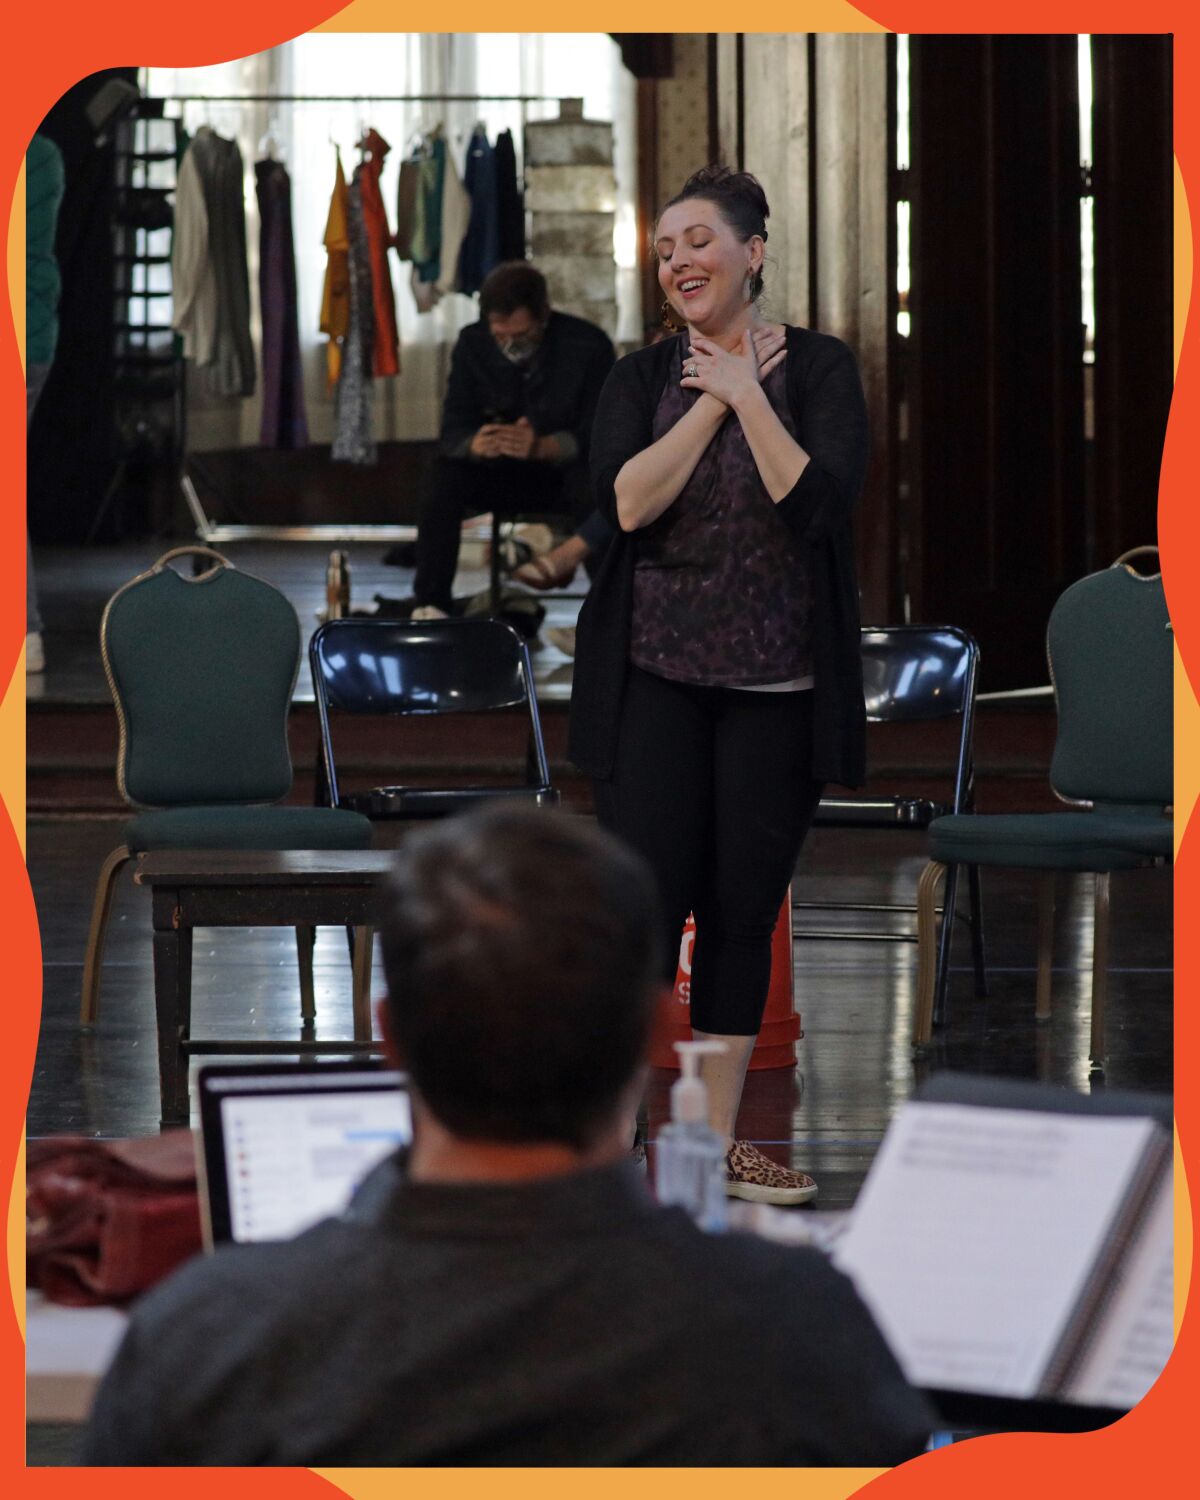 Jamie Chamberlin as "Fiordiligi" rehearses her scene during Pacific Opera Project's "COVID fan tutte" at Ebell Club. 